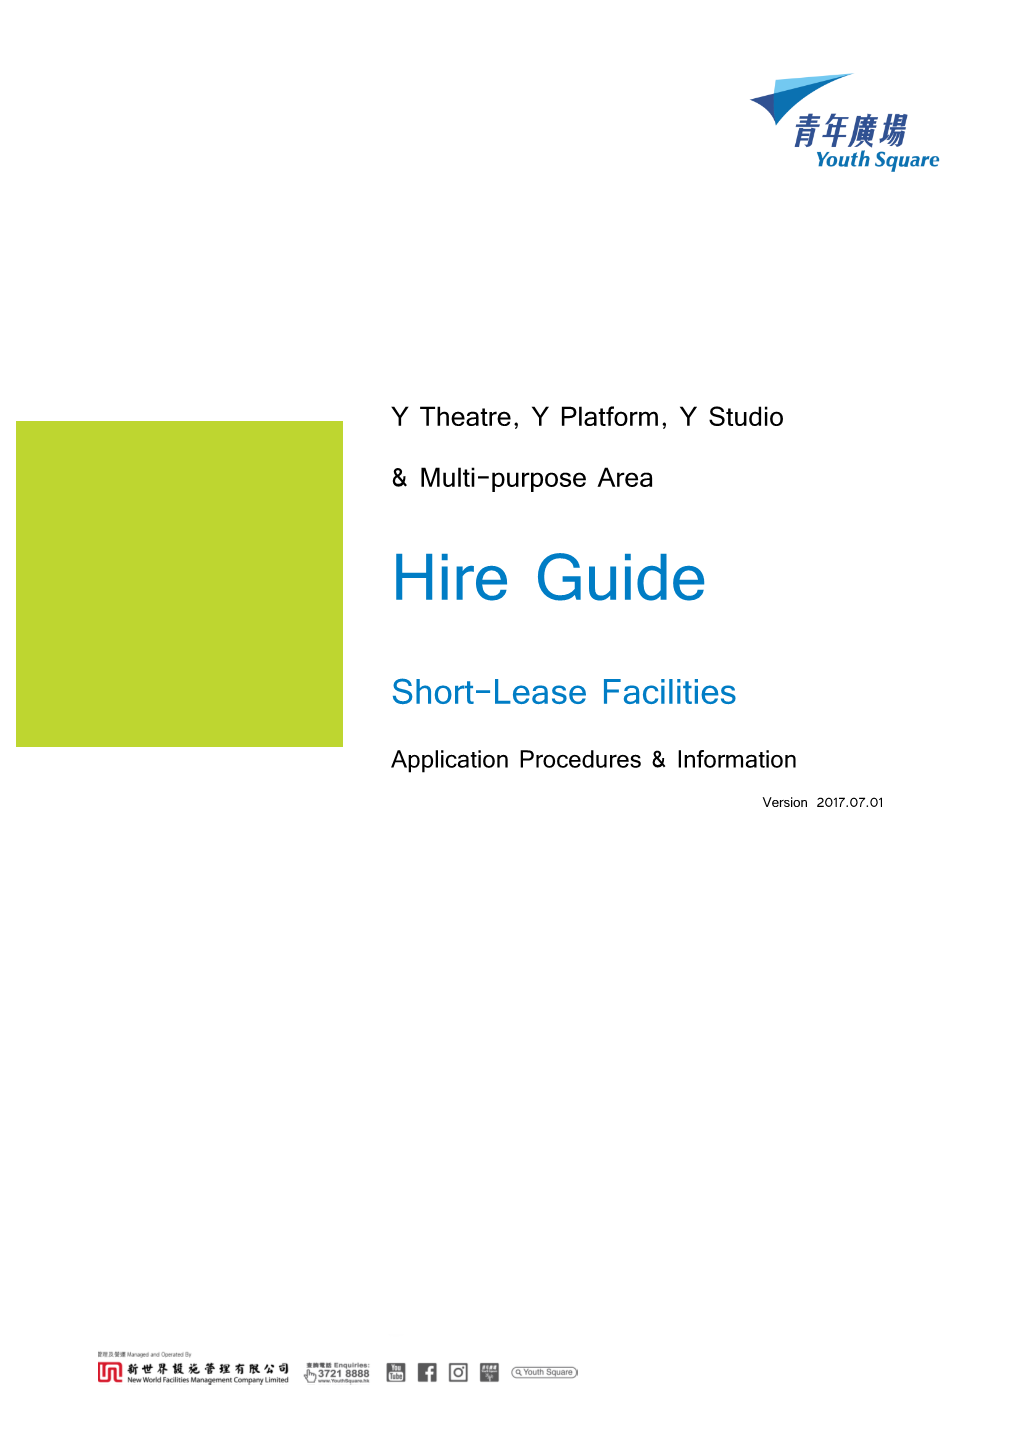 Hire Guide Short-Lease Facilities